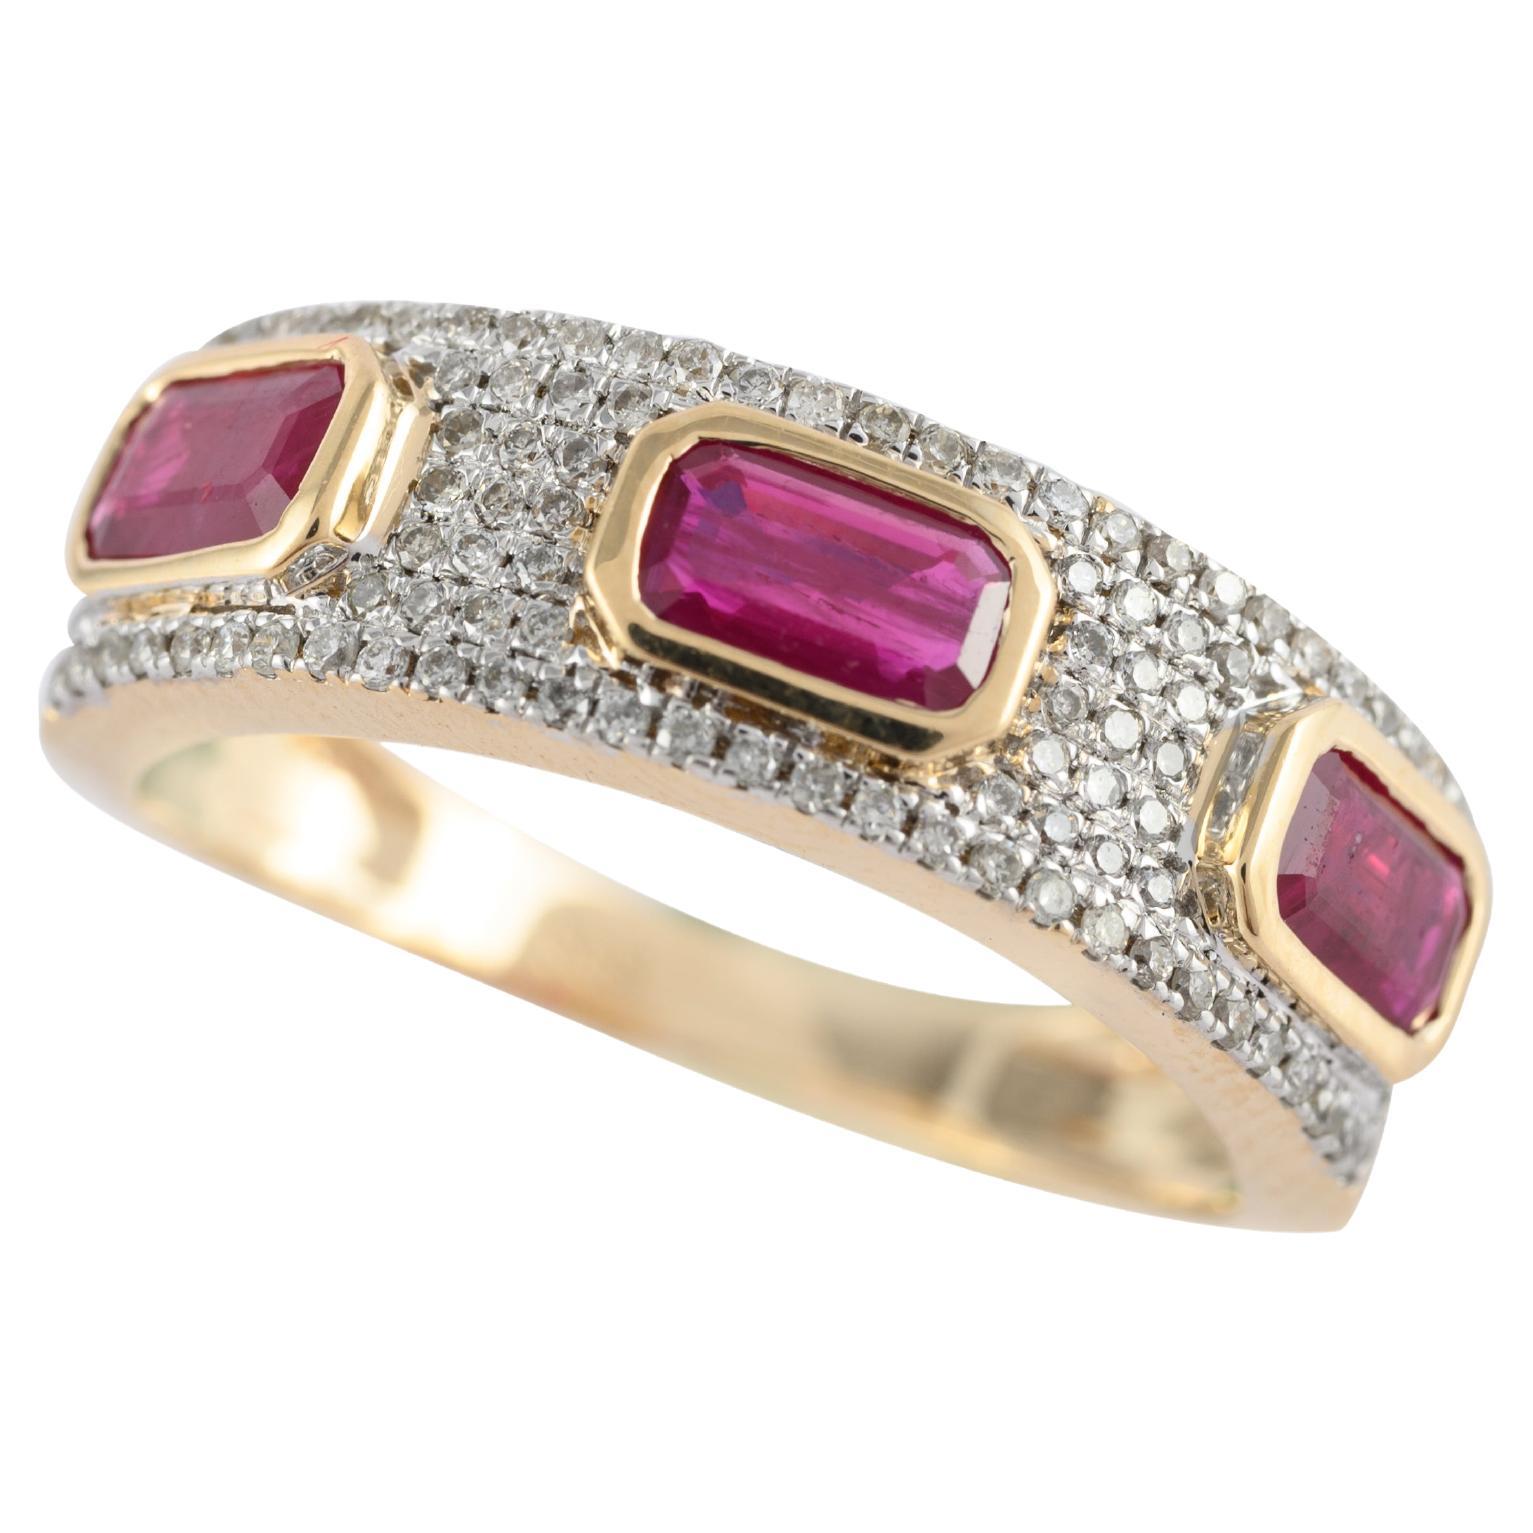 For Sale:  Statement Diamond Ruby Band Ring Gift for Him in 14k Solid Yellow Gold